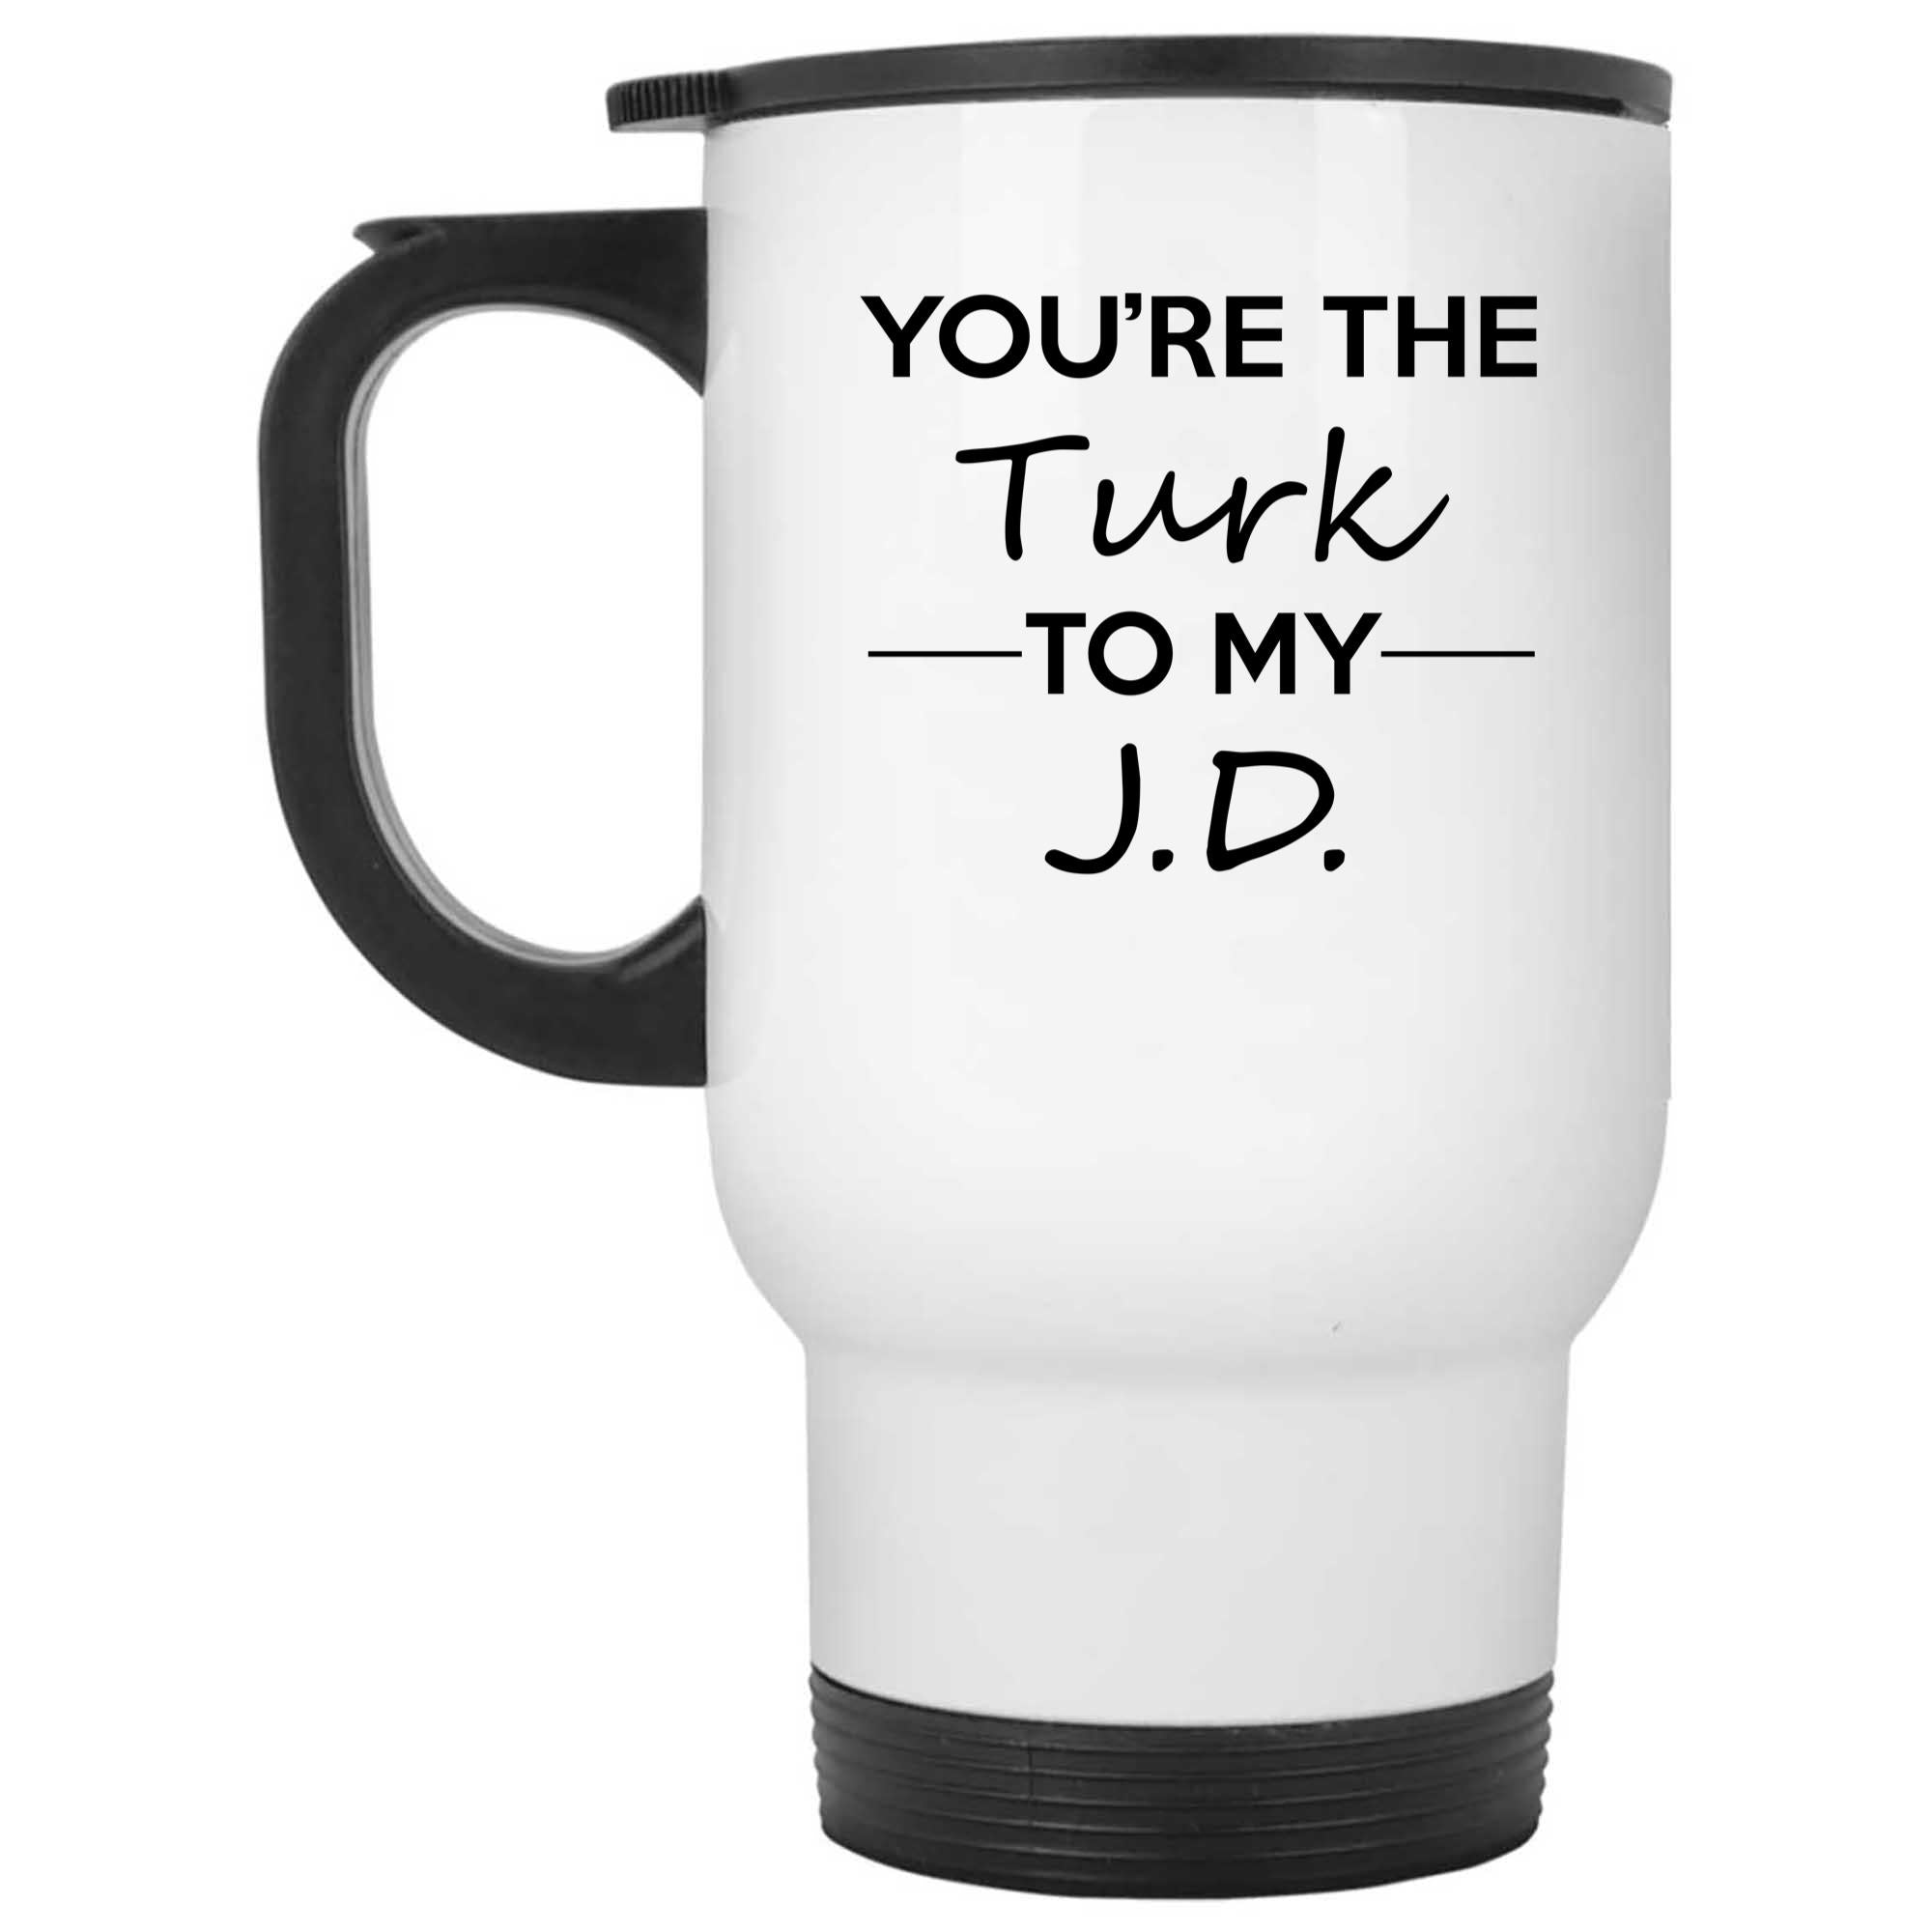 Skitongifts Funny Ceramic Novelty Coffee Mug You Are The Turk To My J.D FUAOsTs